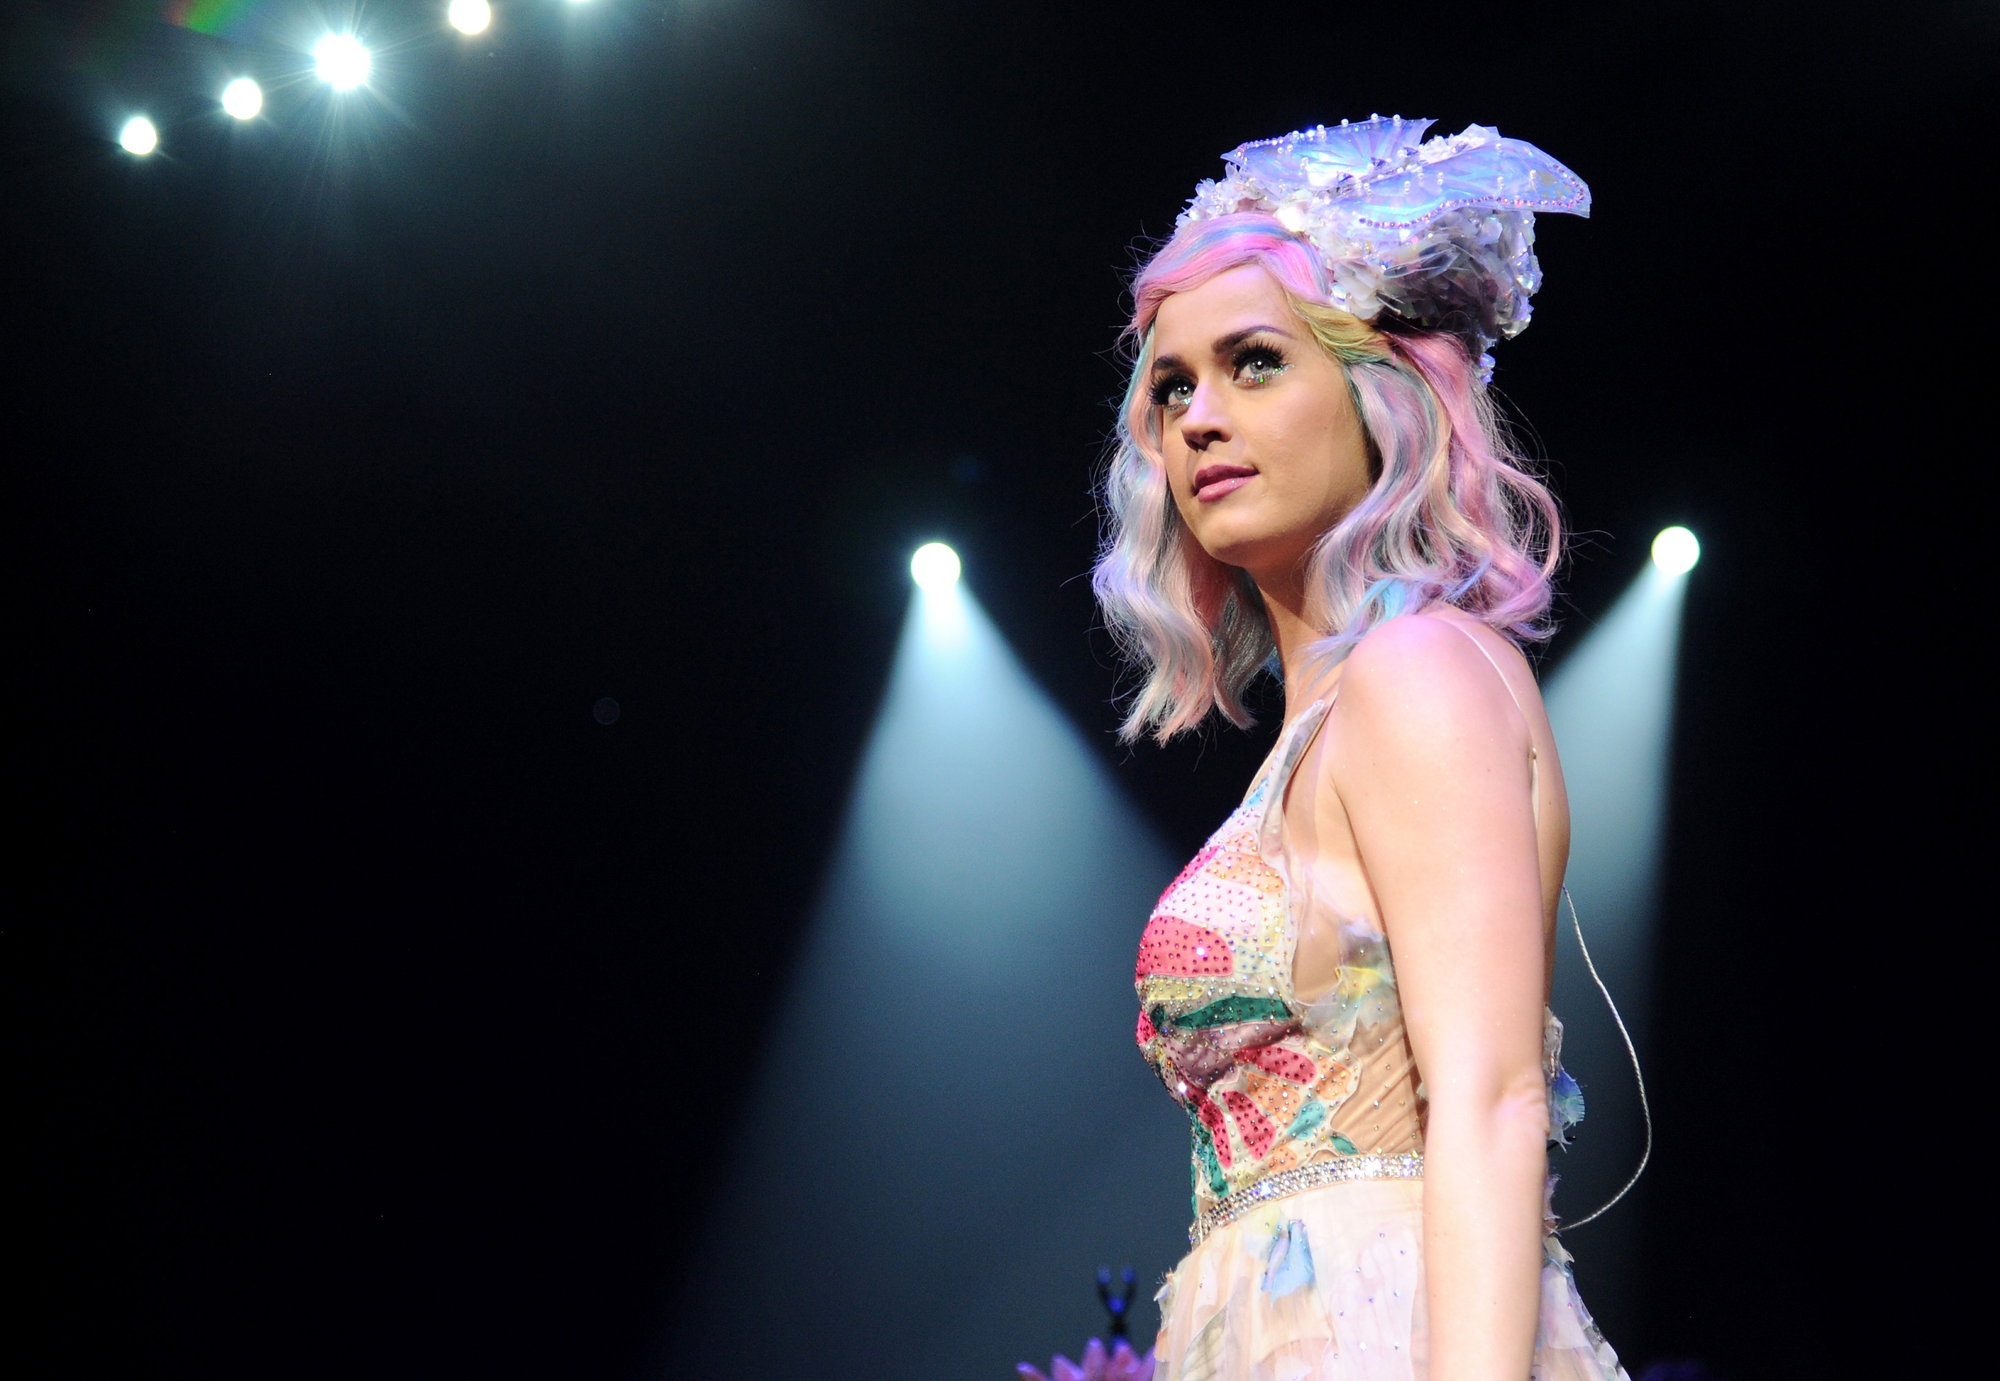 Katy Perry performs onstage during "The Prismatic World Tour" at the Verizon Center on June 24, 2014 in Washington, DC.